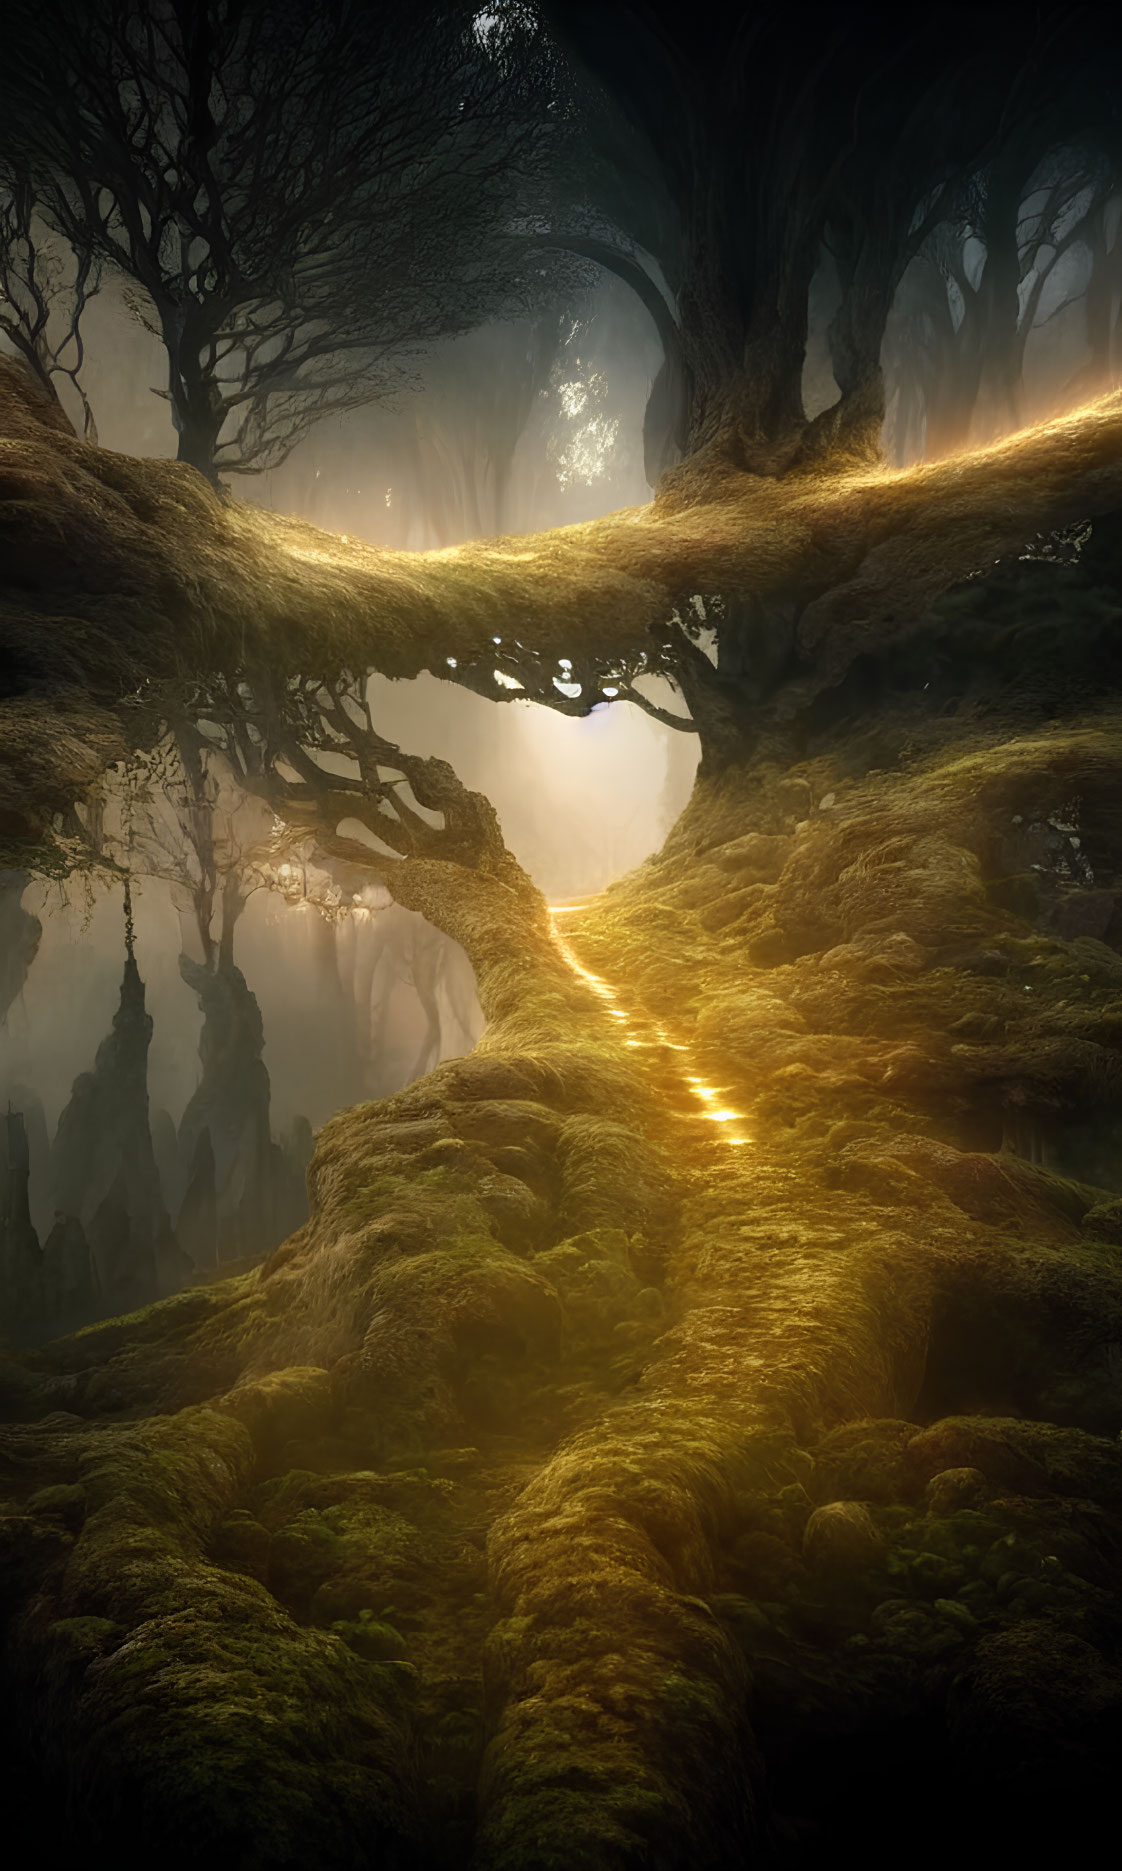 Mystical forest scene with glowing path, tranquil water, and fog